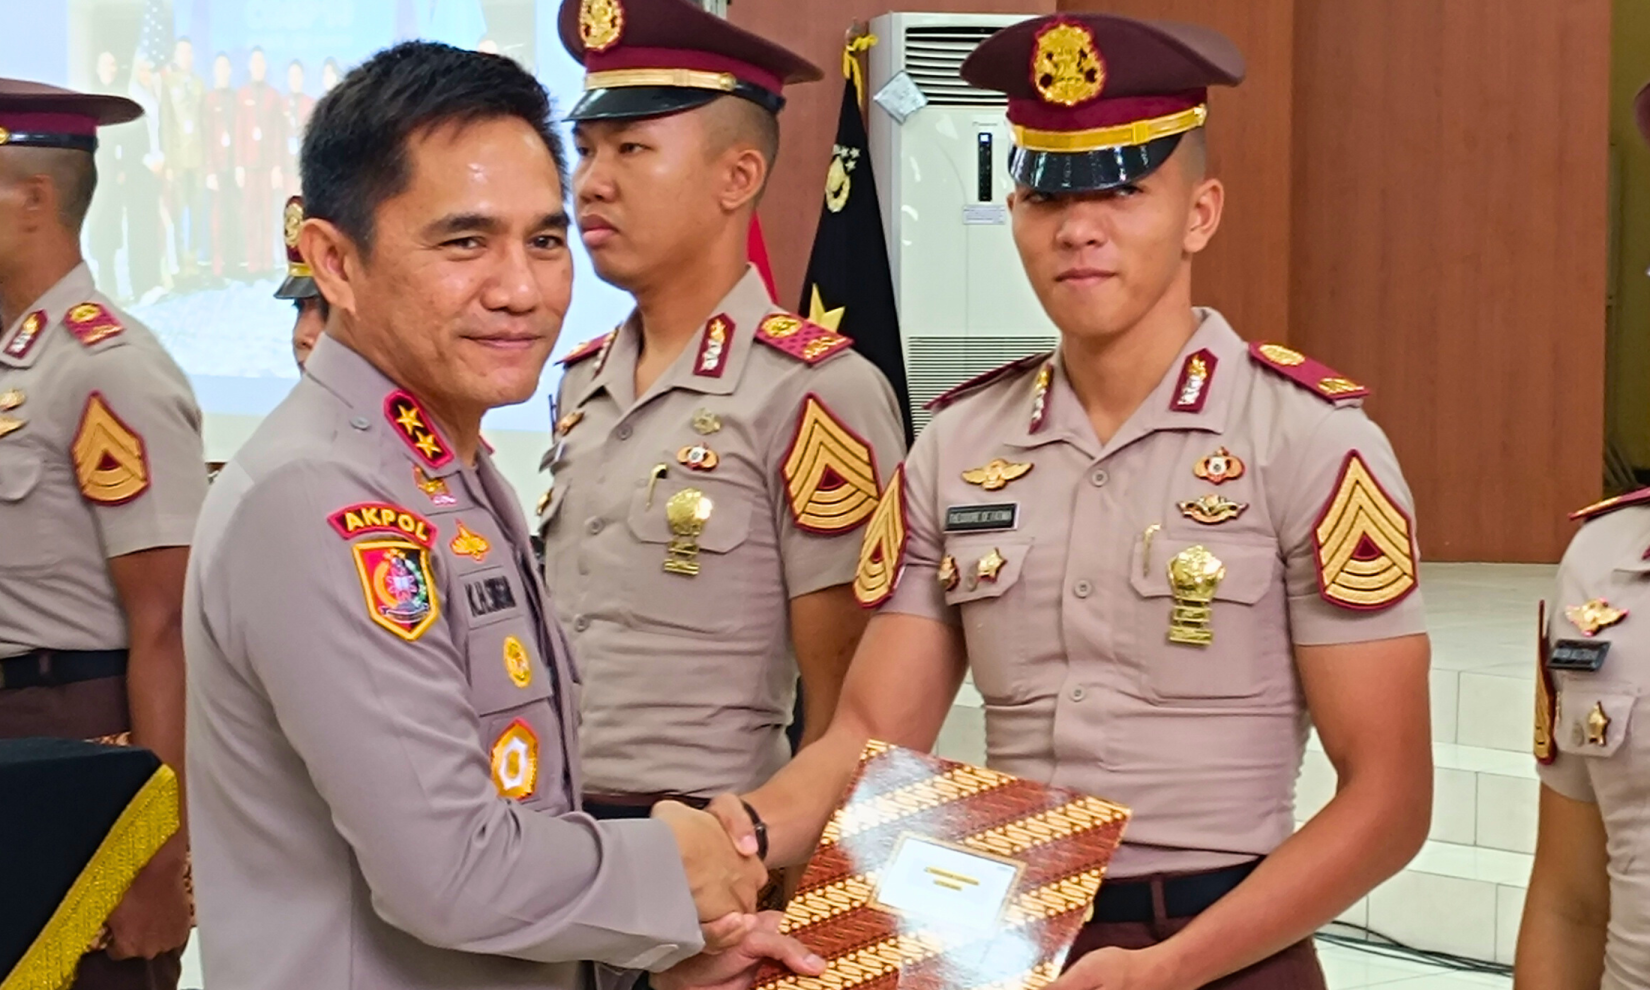 Inspector General of Police Krisno H. Siregar, S.I.K., M.H., Governor of the Police Academy, gave an award to Theodore Gomgom Octofarrel, level 4 cadet at the Indonesian Police Academy, who finished in the top 8 of the UNODC Essay Competition on Police Integrity.